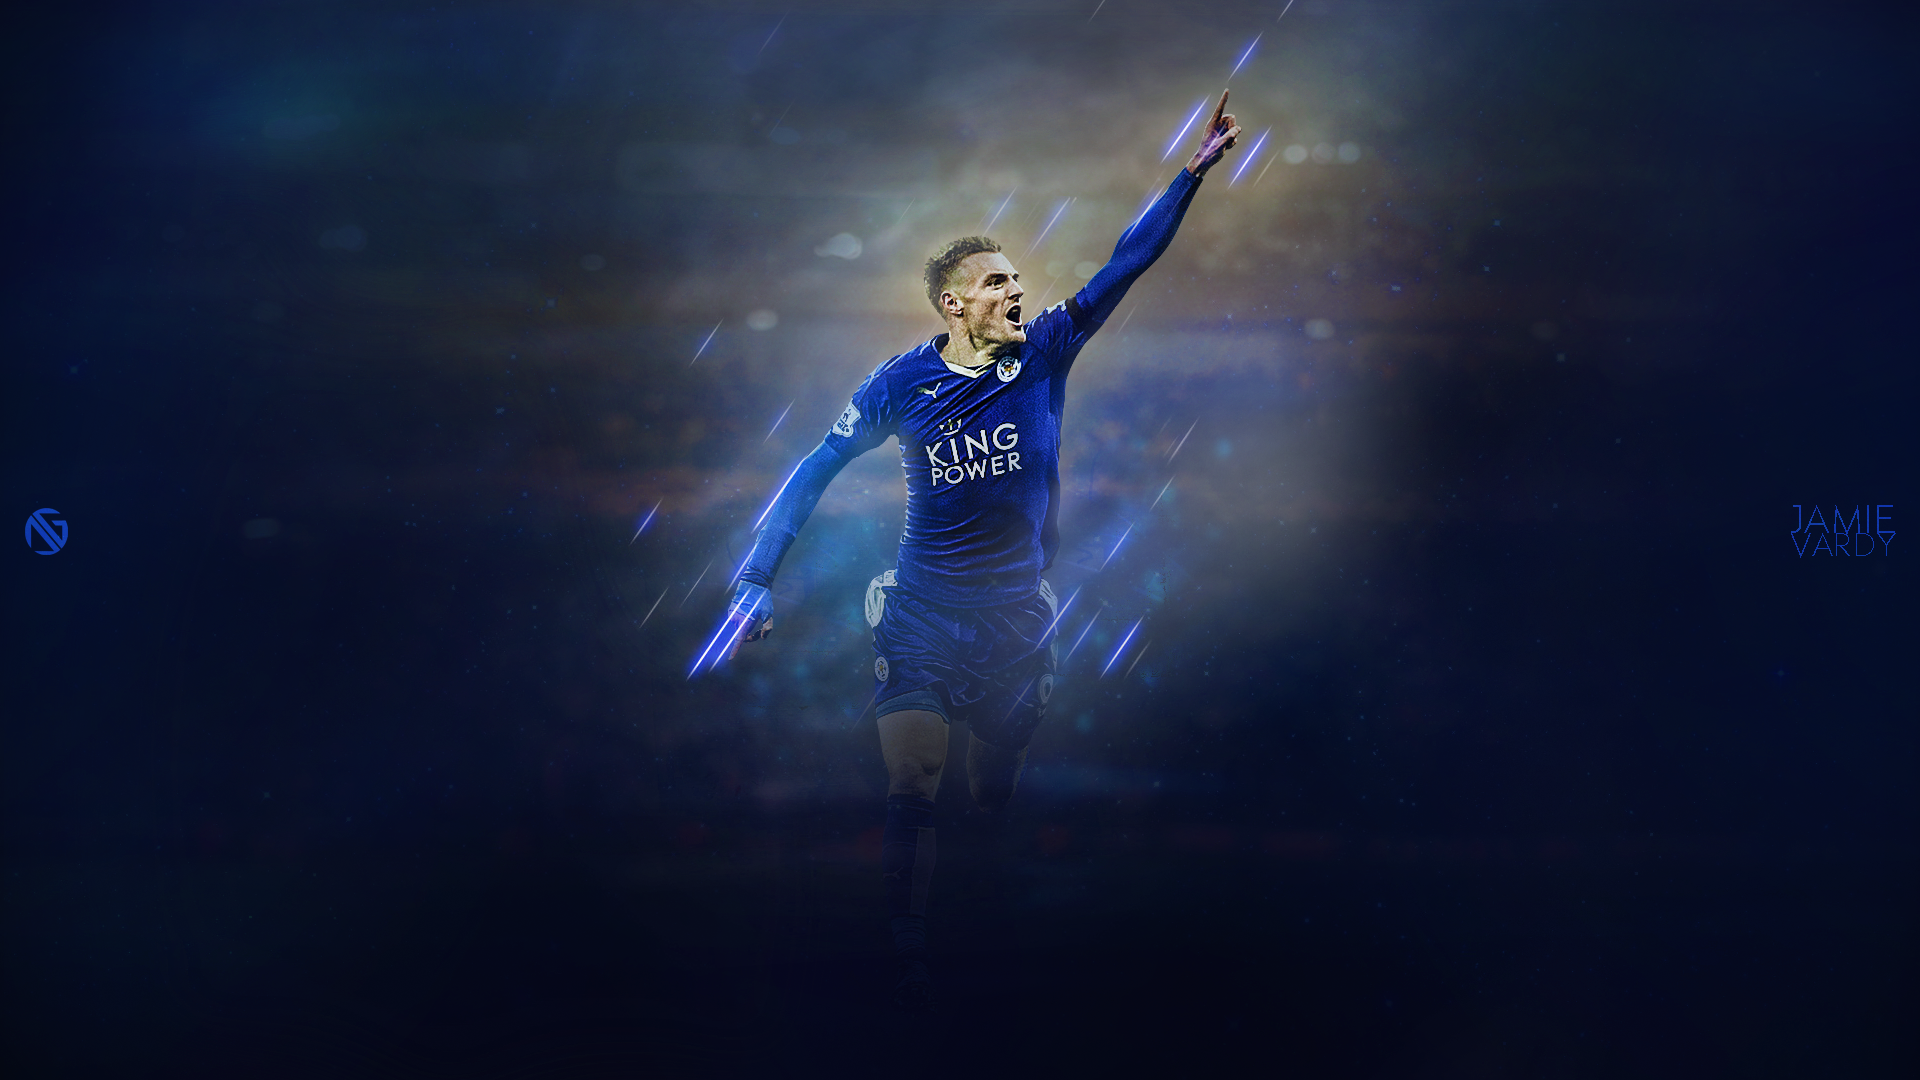 Jamie Vardy Wallpaper By Dreamgraphicss-d9jc9ni - Jamie Vardy Wallpapers Hd , HD Wallpaper & Backgrounds